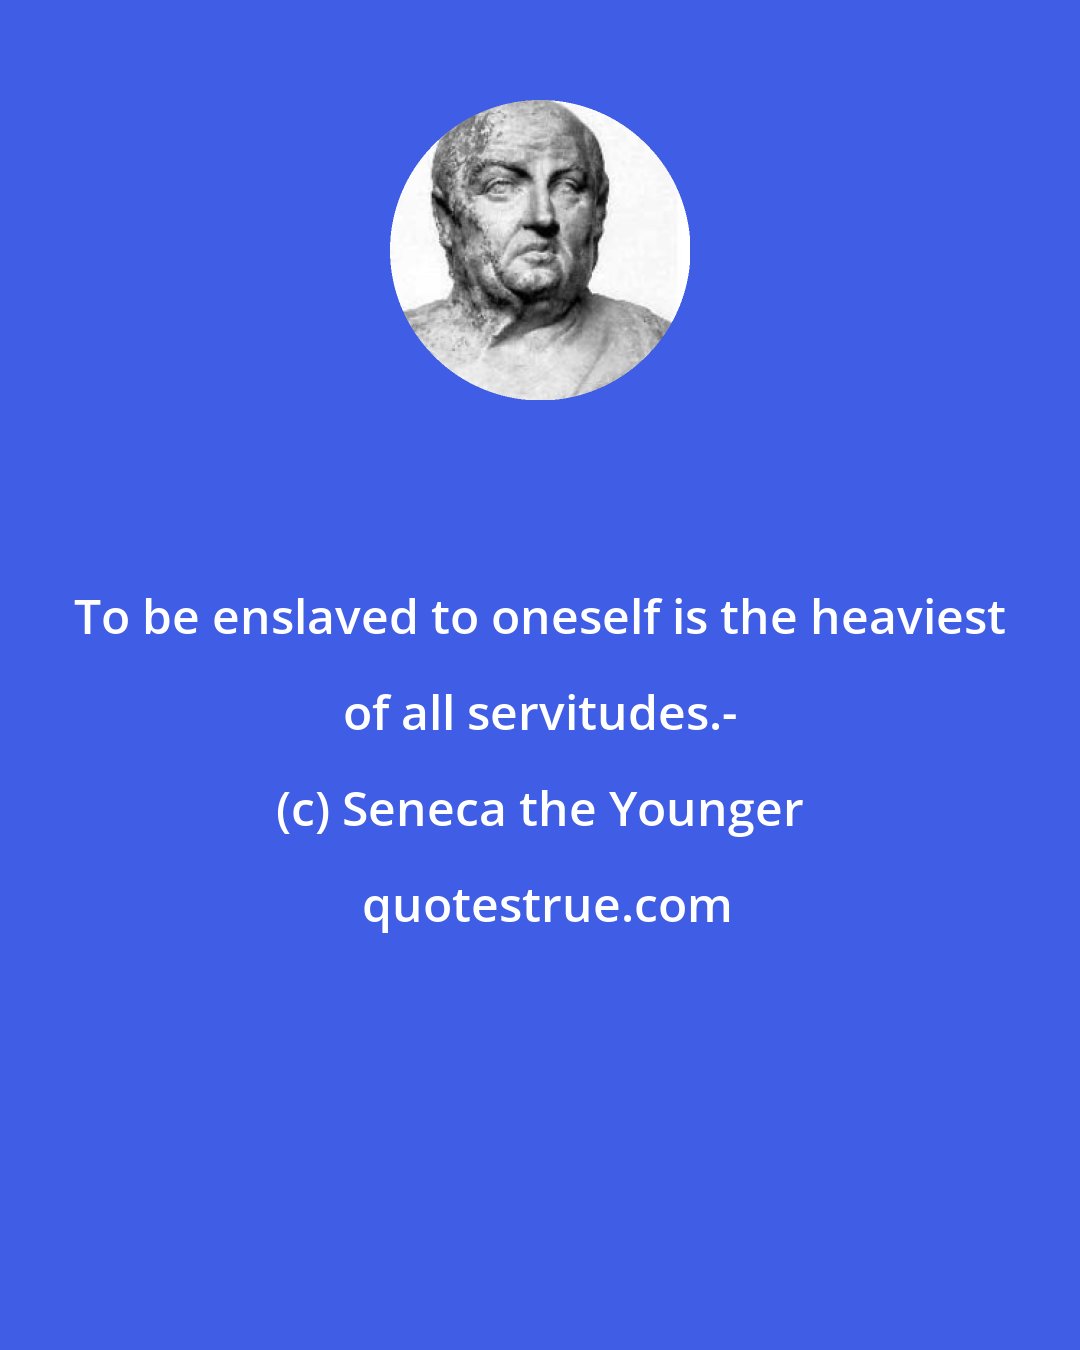 Seneca the Younger: To be enslaved to oneself is the heaviest of all servitudes.-